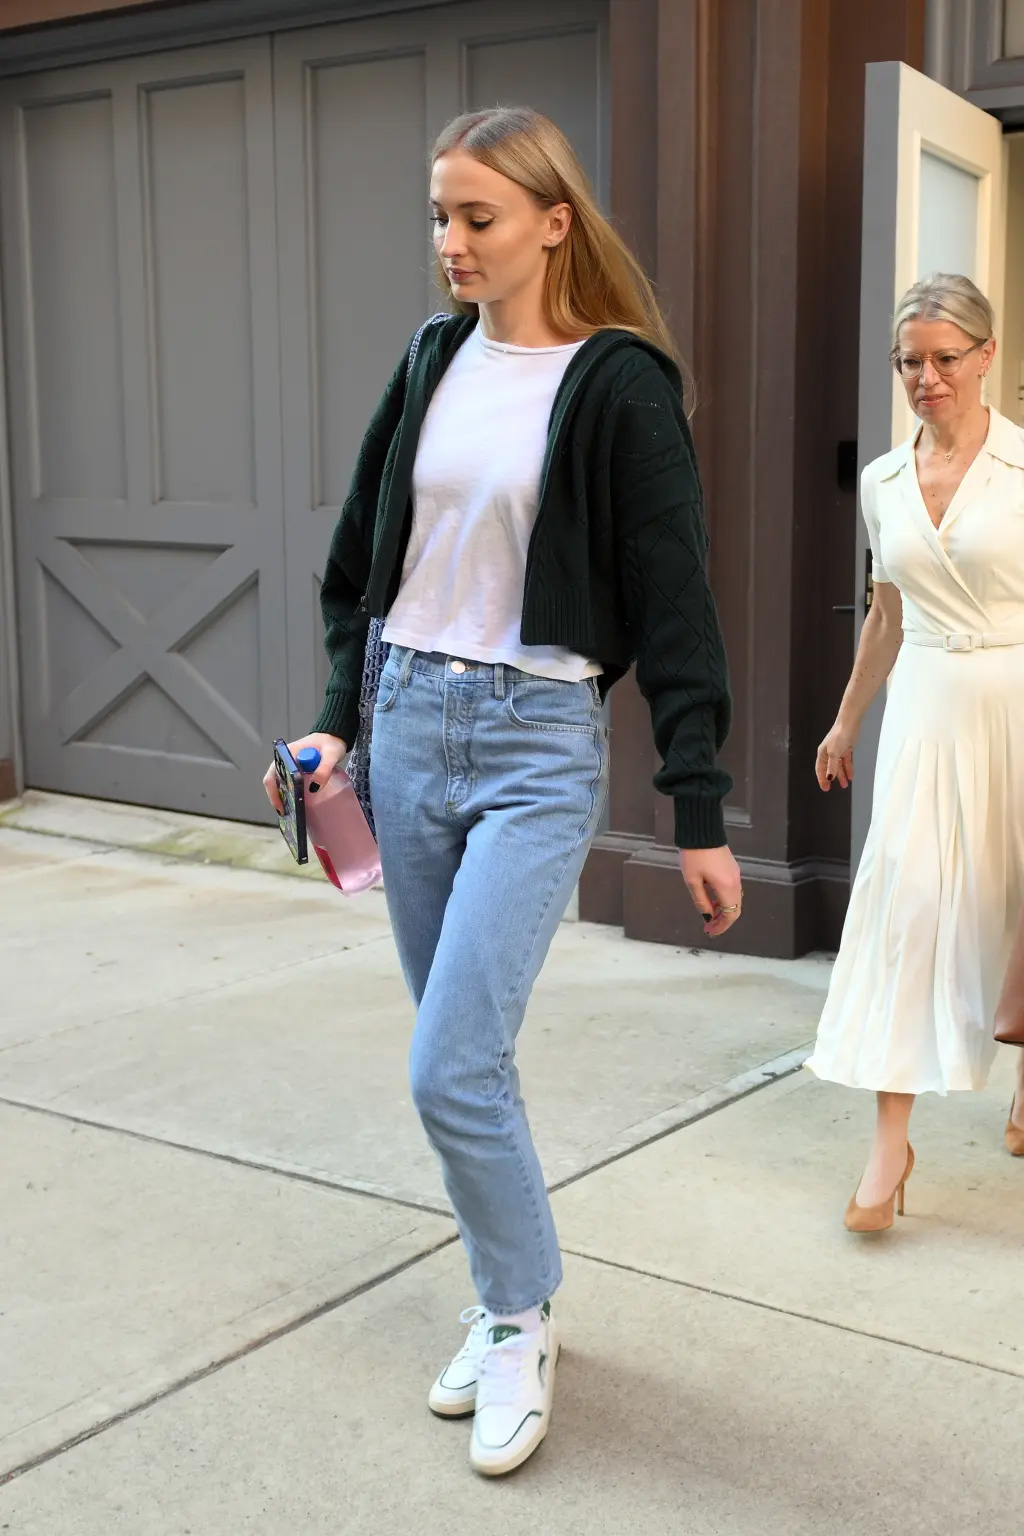 Sophie Turner heading out of the Wilmer Hale office